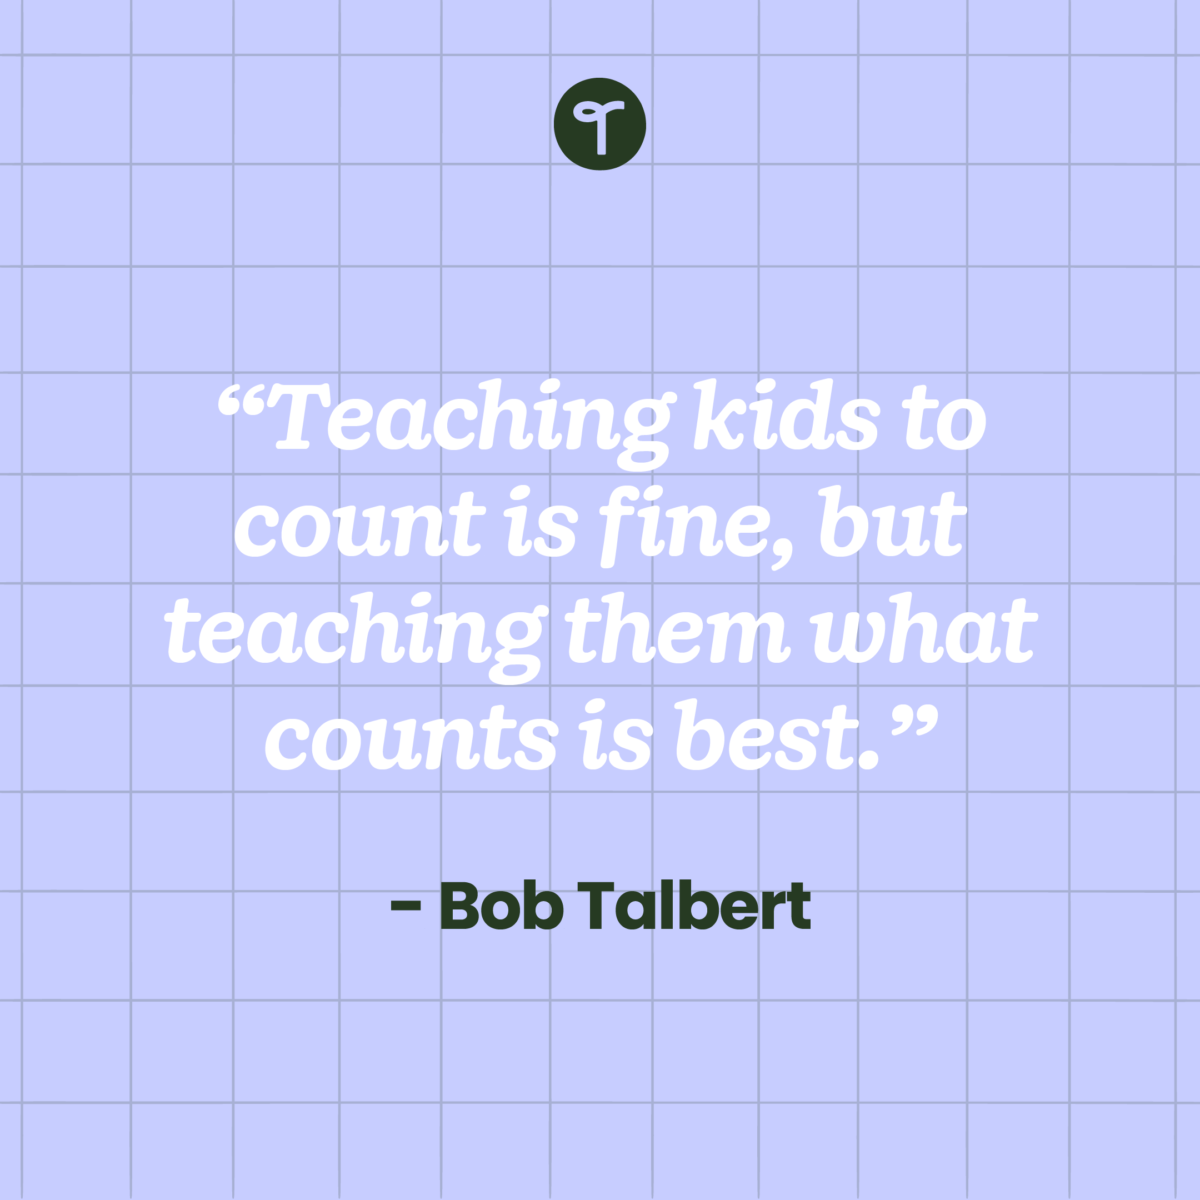 inspirational teacher quote teaching kids to count is fine, but teaching them what counts is best by bob talbert